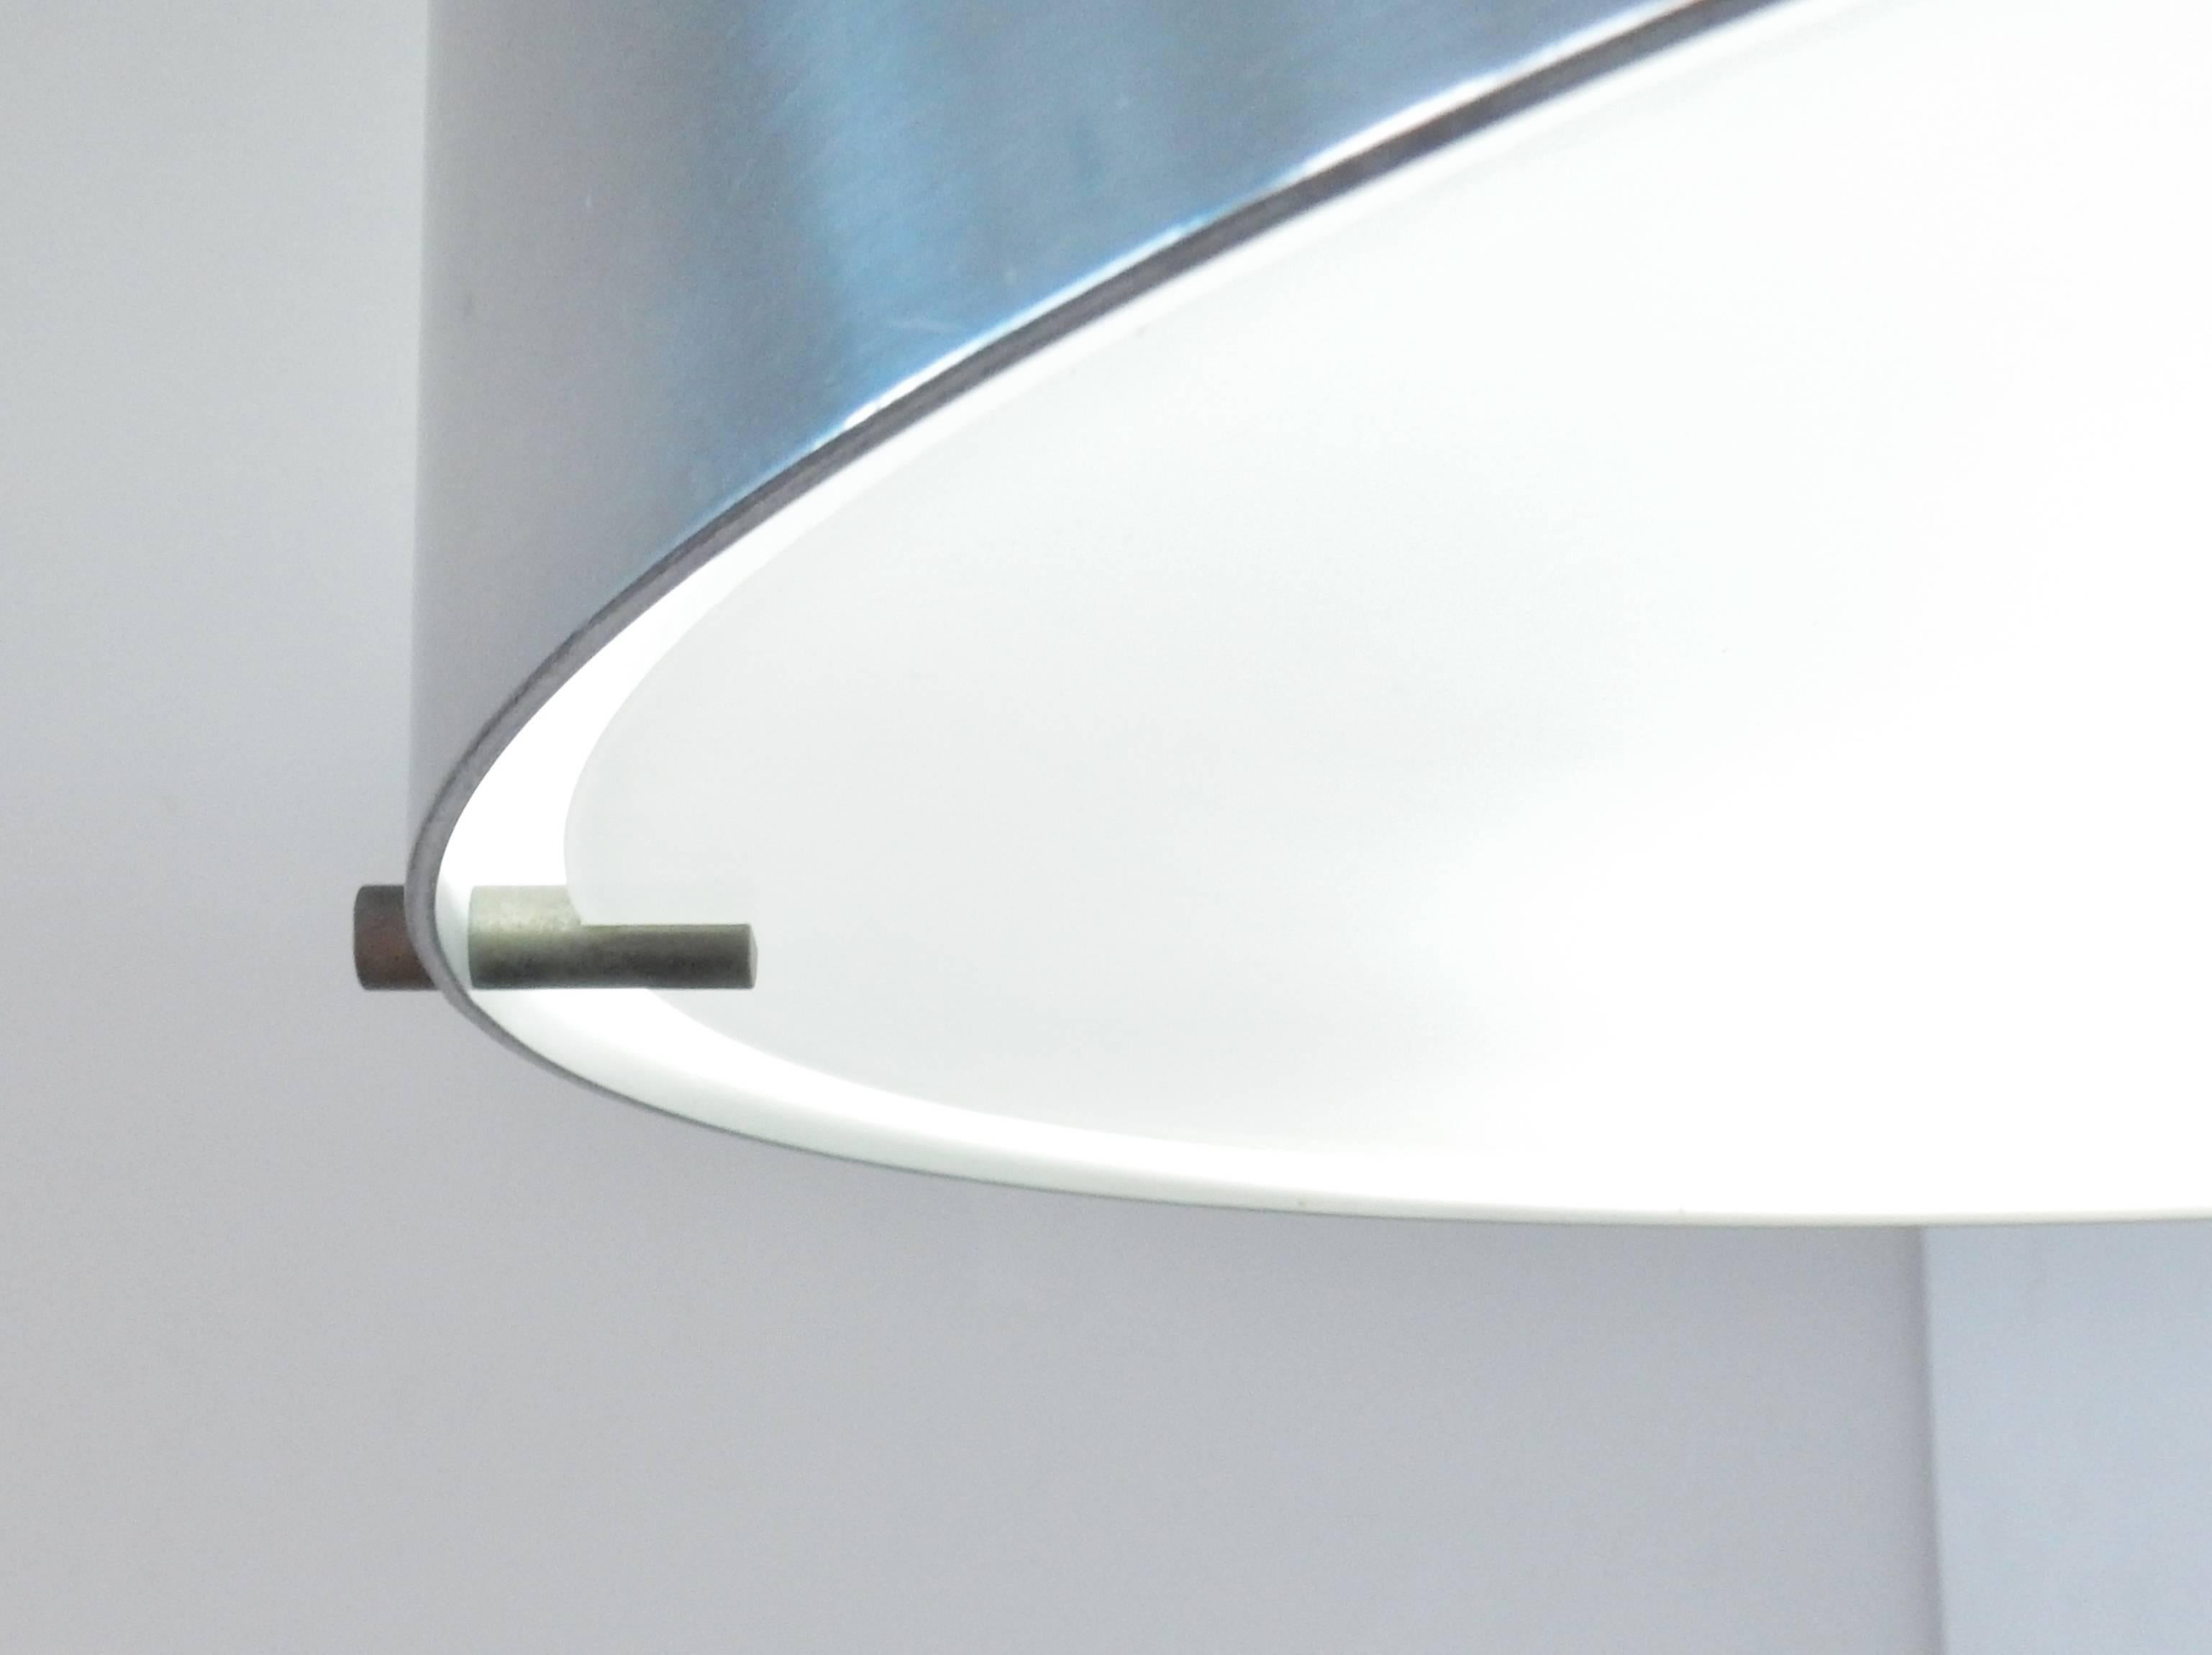 This light is a design by Bruno Gatta for Stilnovo. 
We have ten wall sconces of a chromed circle on a white wall fixture available.
We have more lights available of this model, but with different colors to the wall fixture.
All in a very good